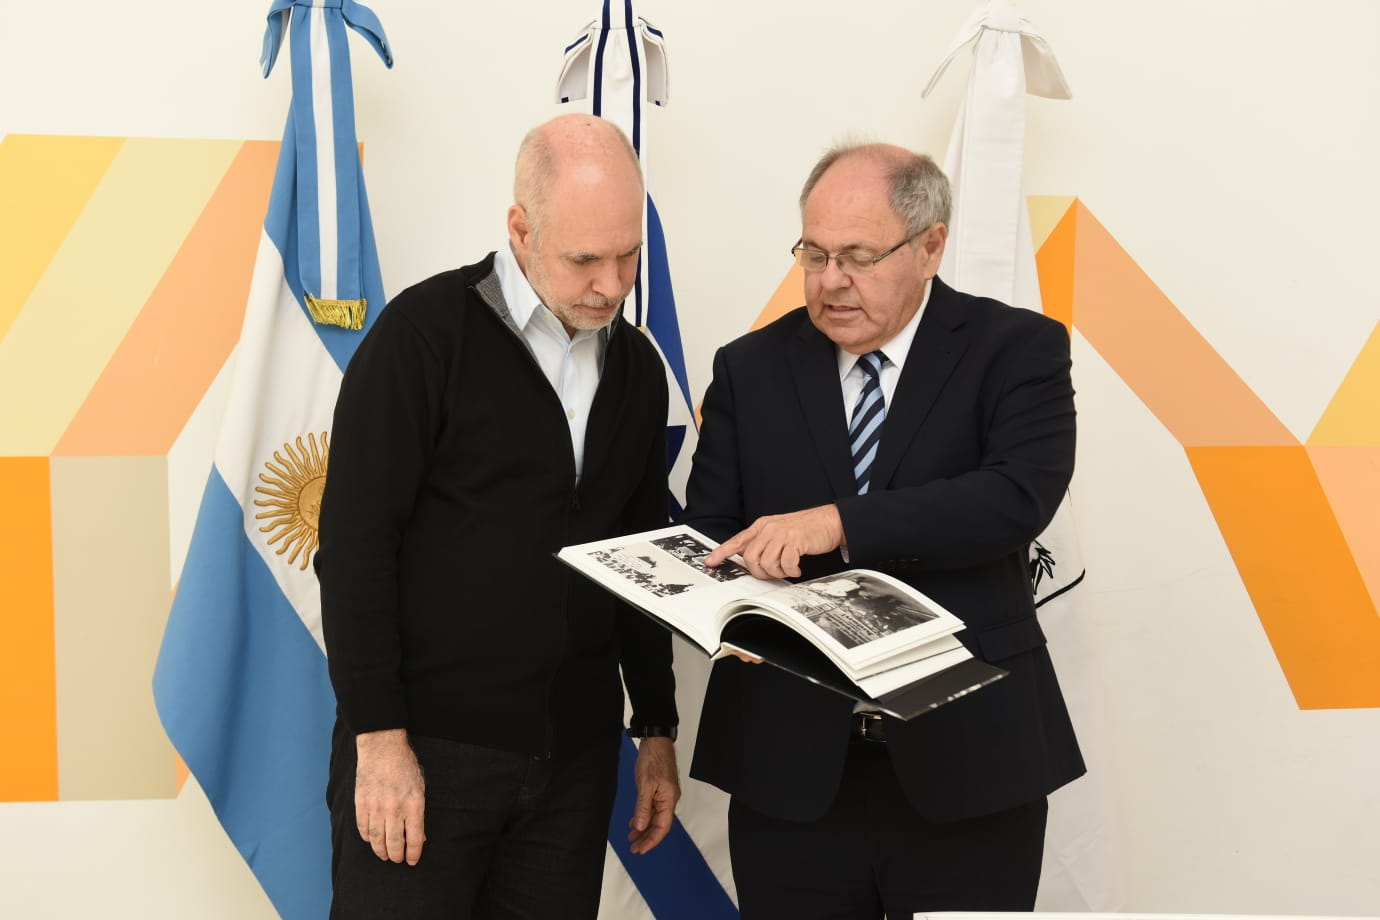 Dani Dayan with the Chief of Government of the City of Buenos Aires Horacio Rodríguez Larreta